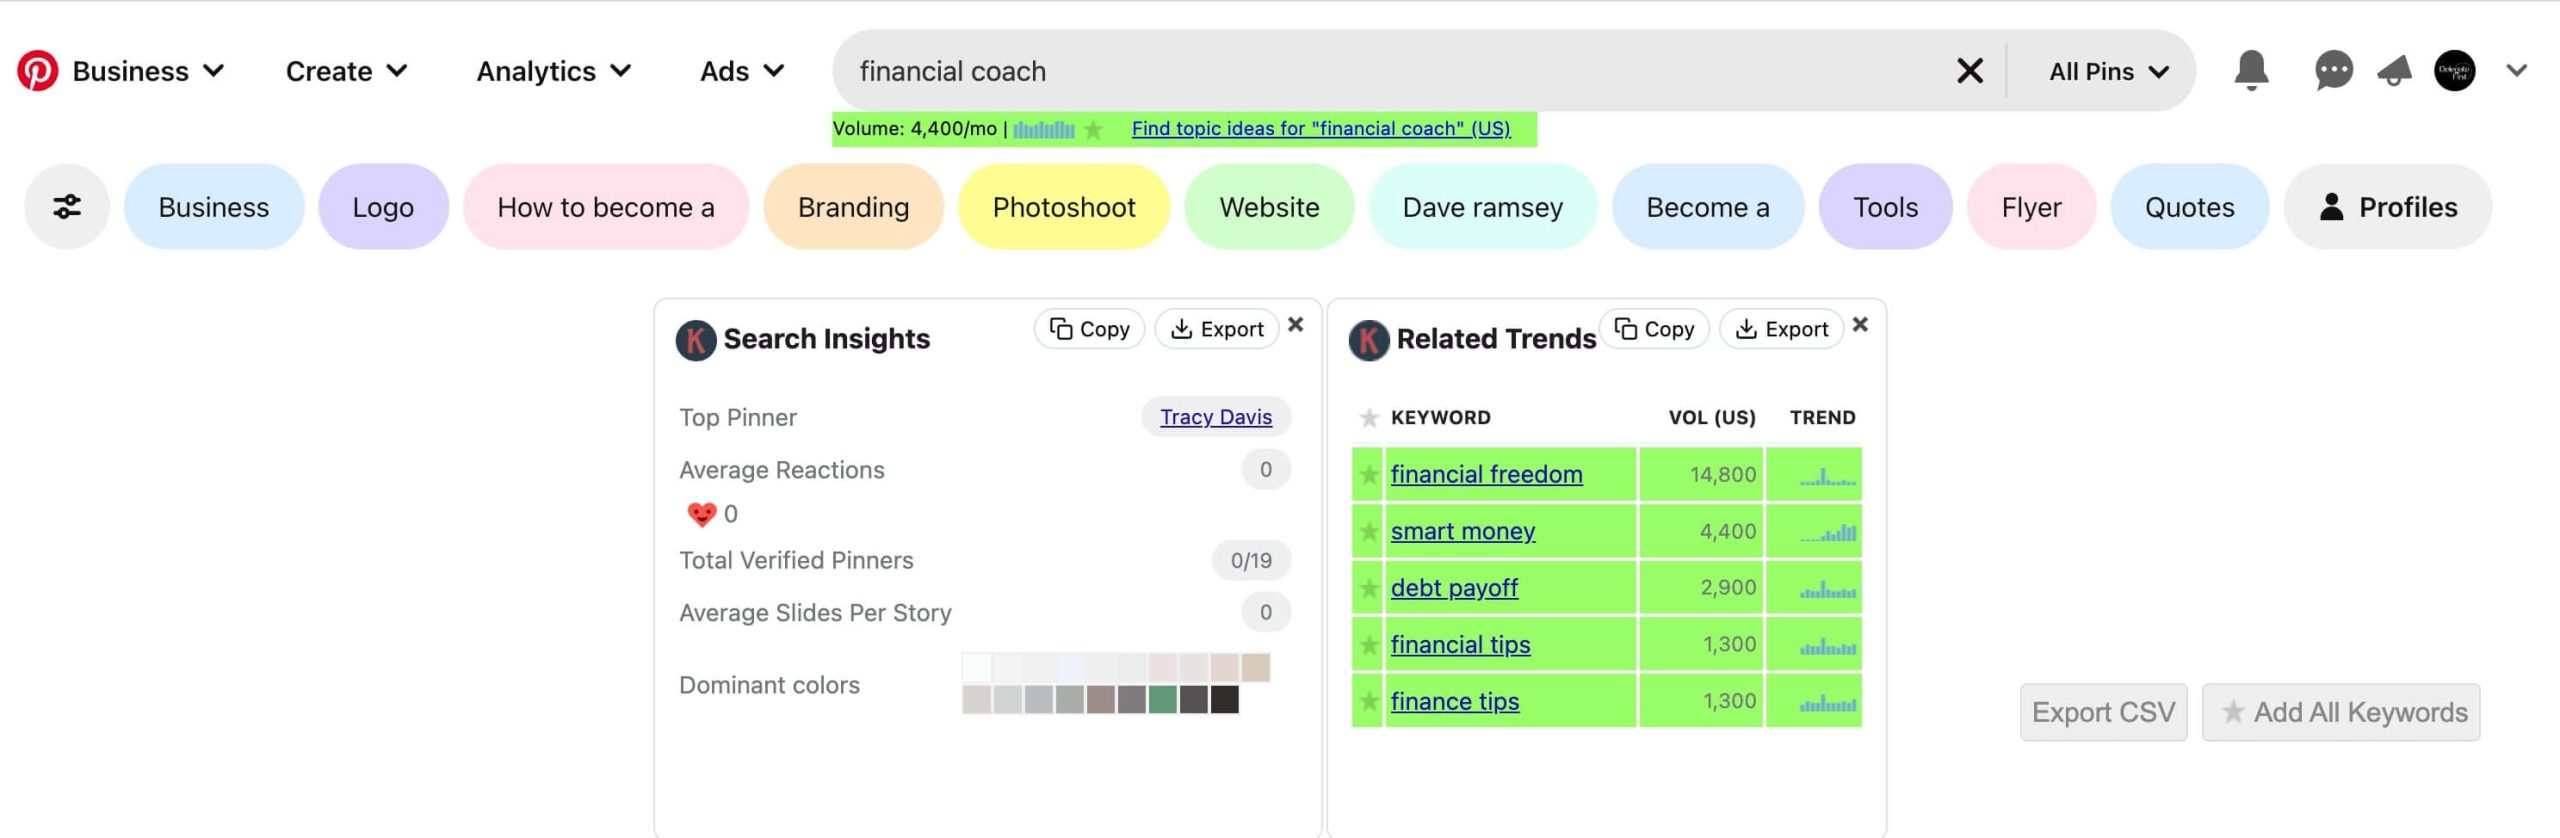 An example of keyword results through the keywords everywhere tool for Pinterest